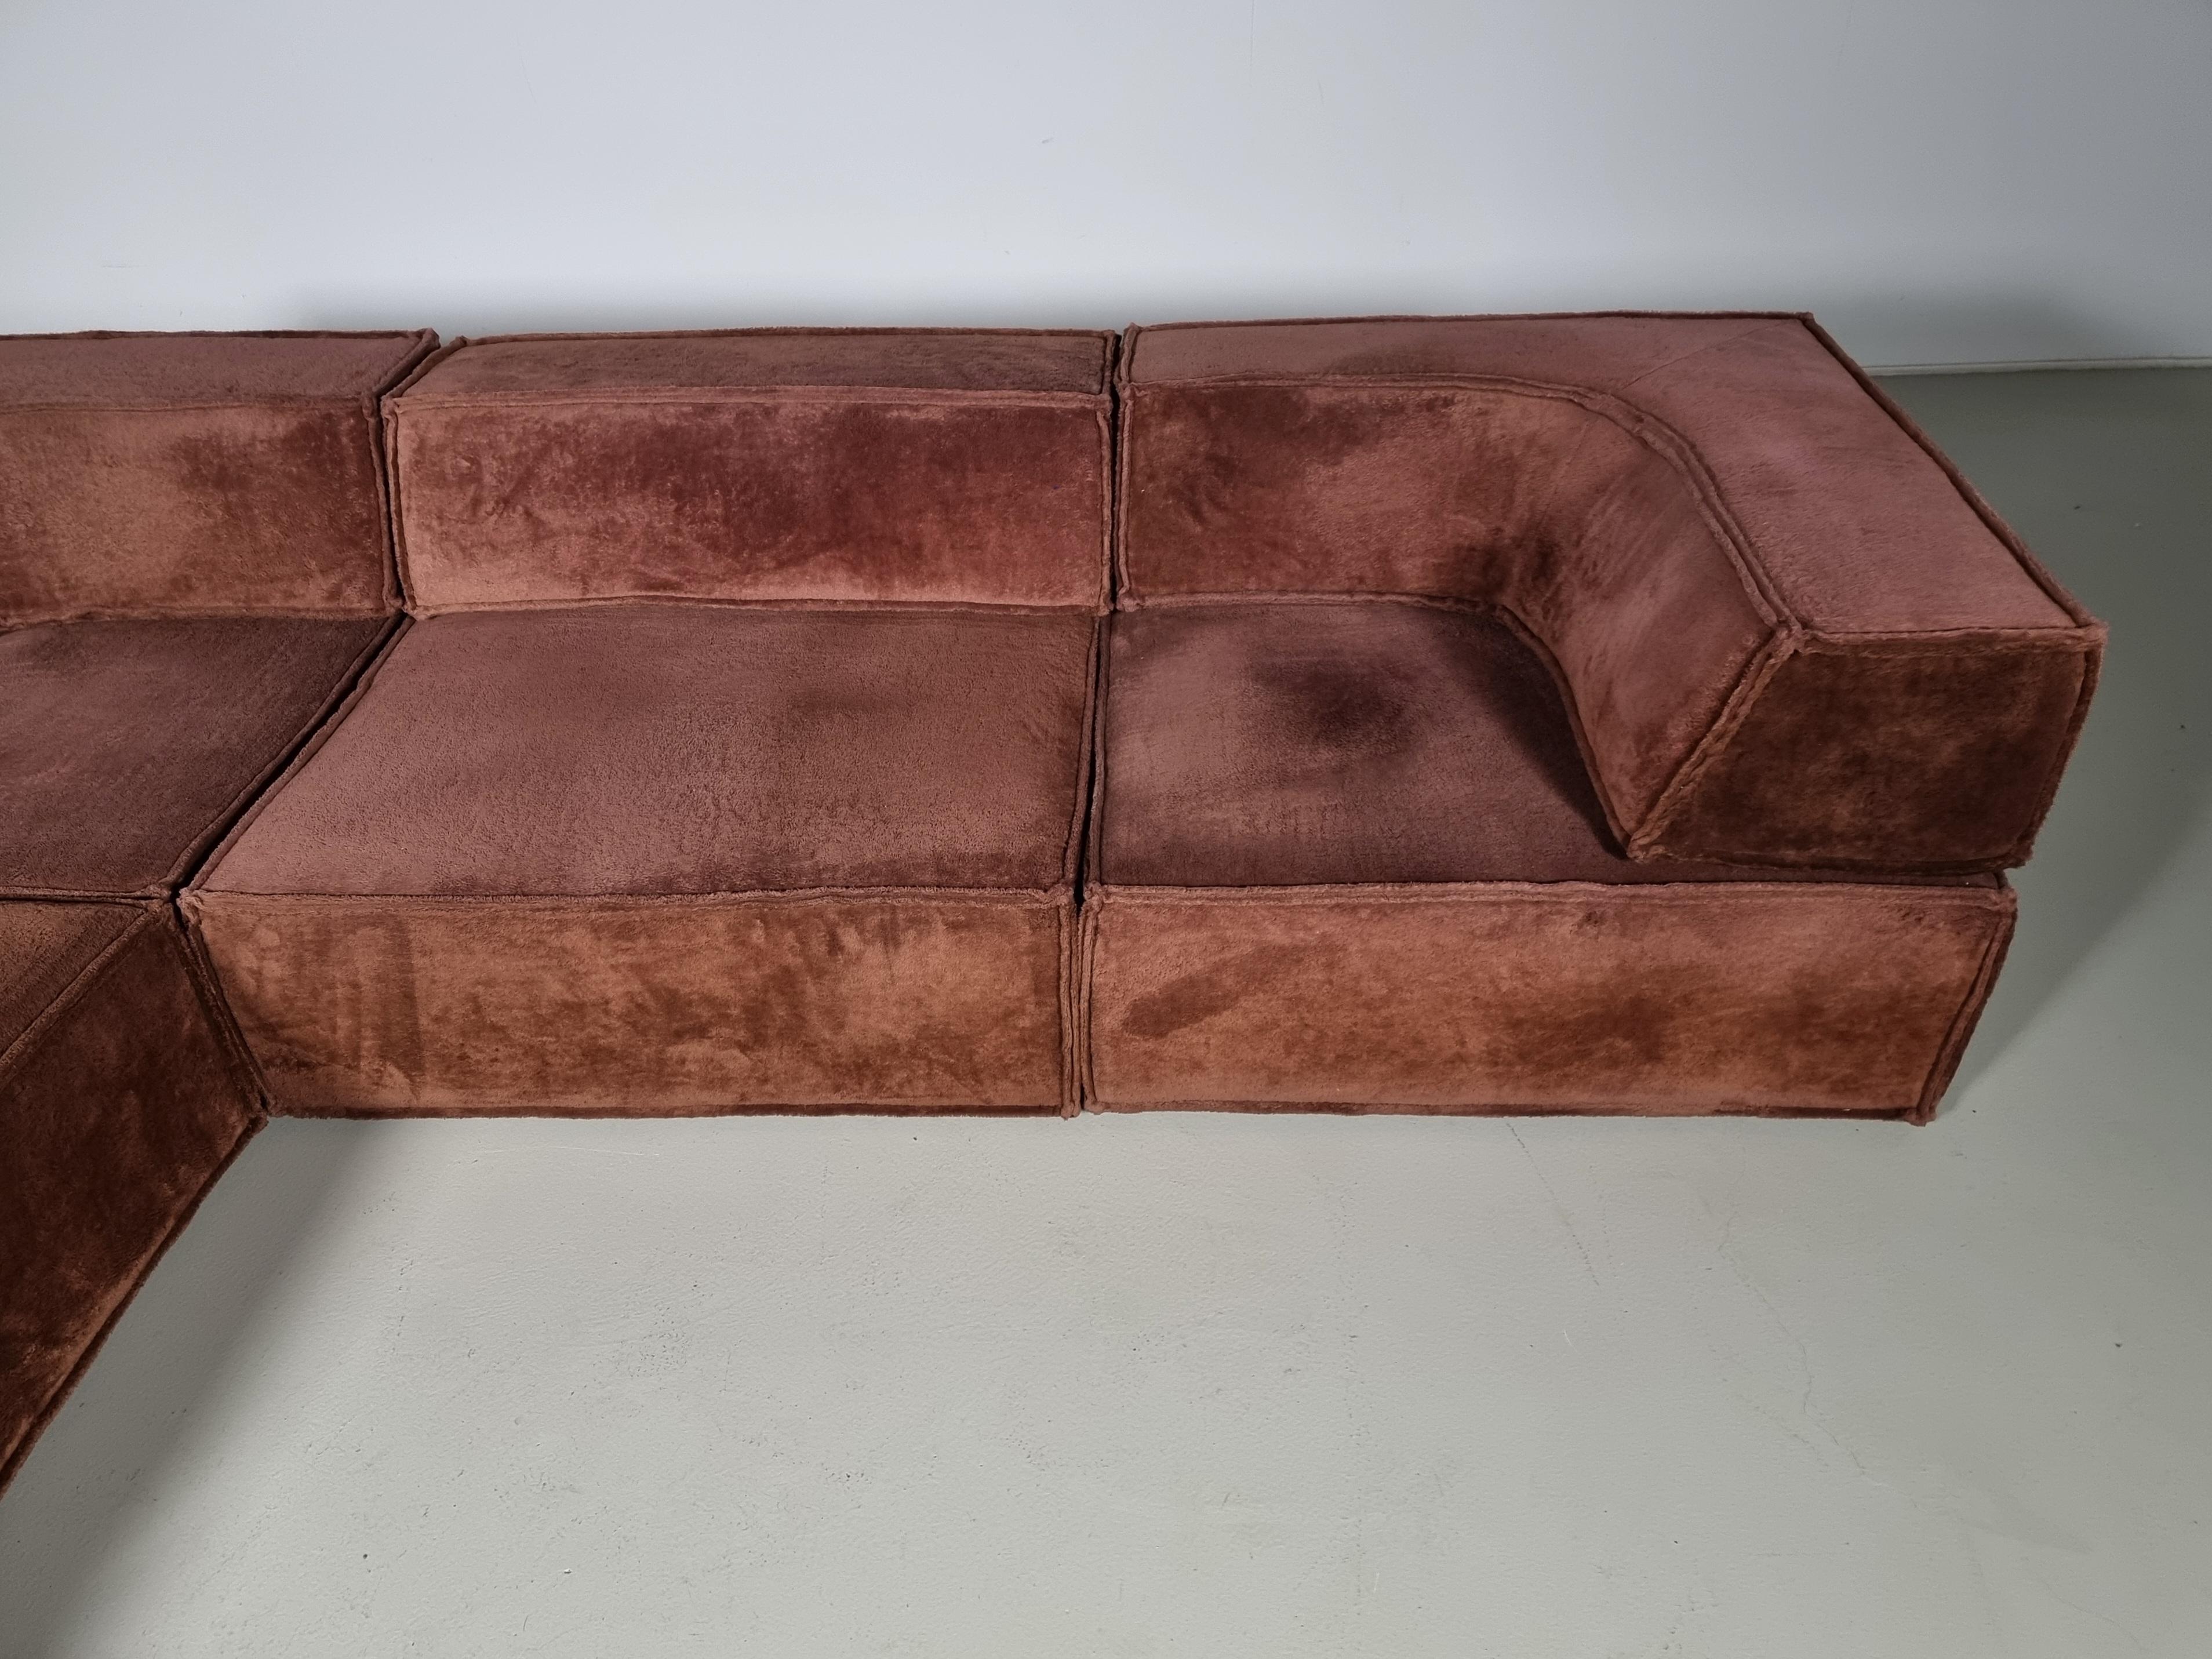 Fabric COR Trio Sofa by Team Form Ag for COR Furniture, Germany, 1970s